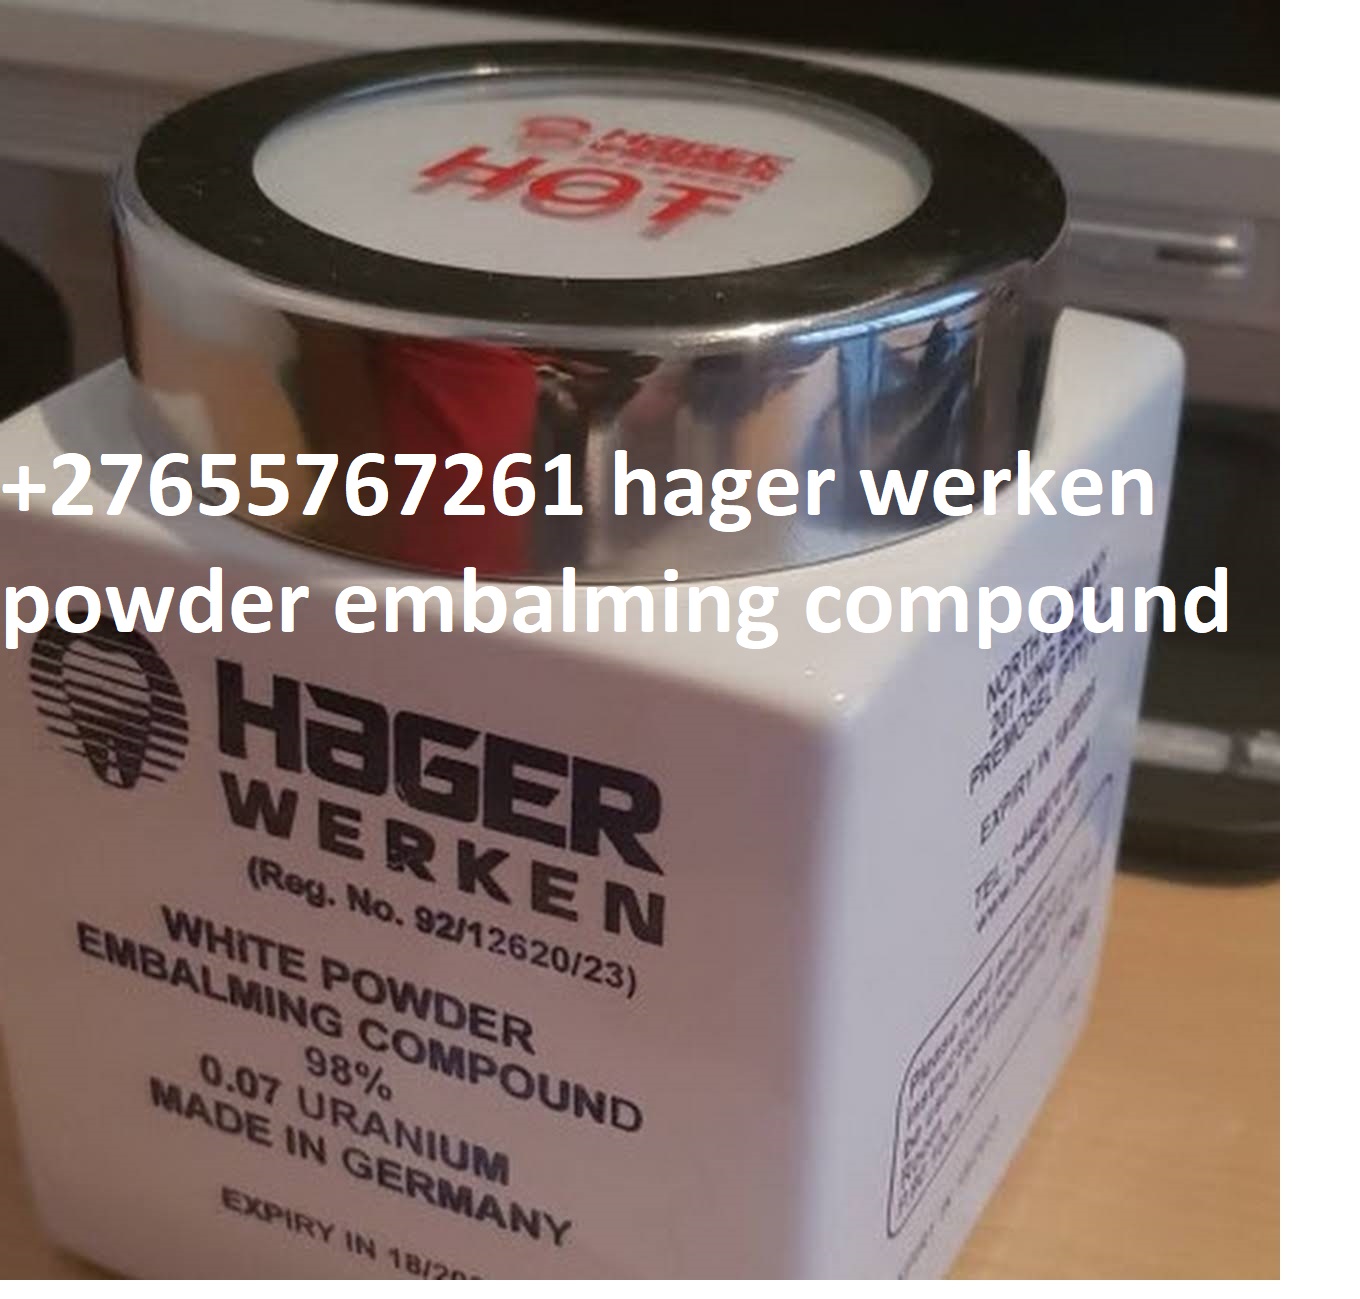 Call Now For 27655767261 Hager Werken Embalming Compound Pi - New York - New York ID1559600 2